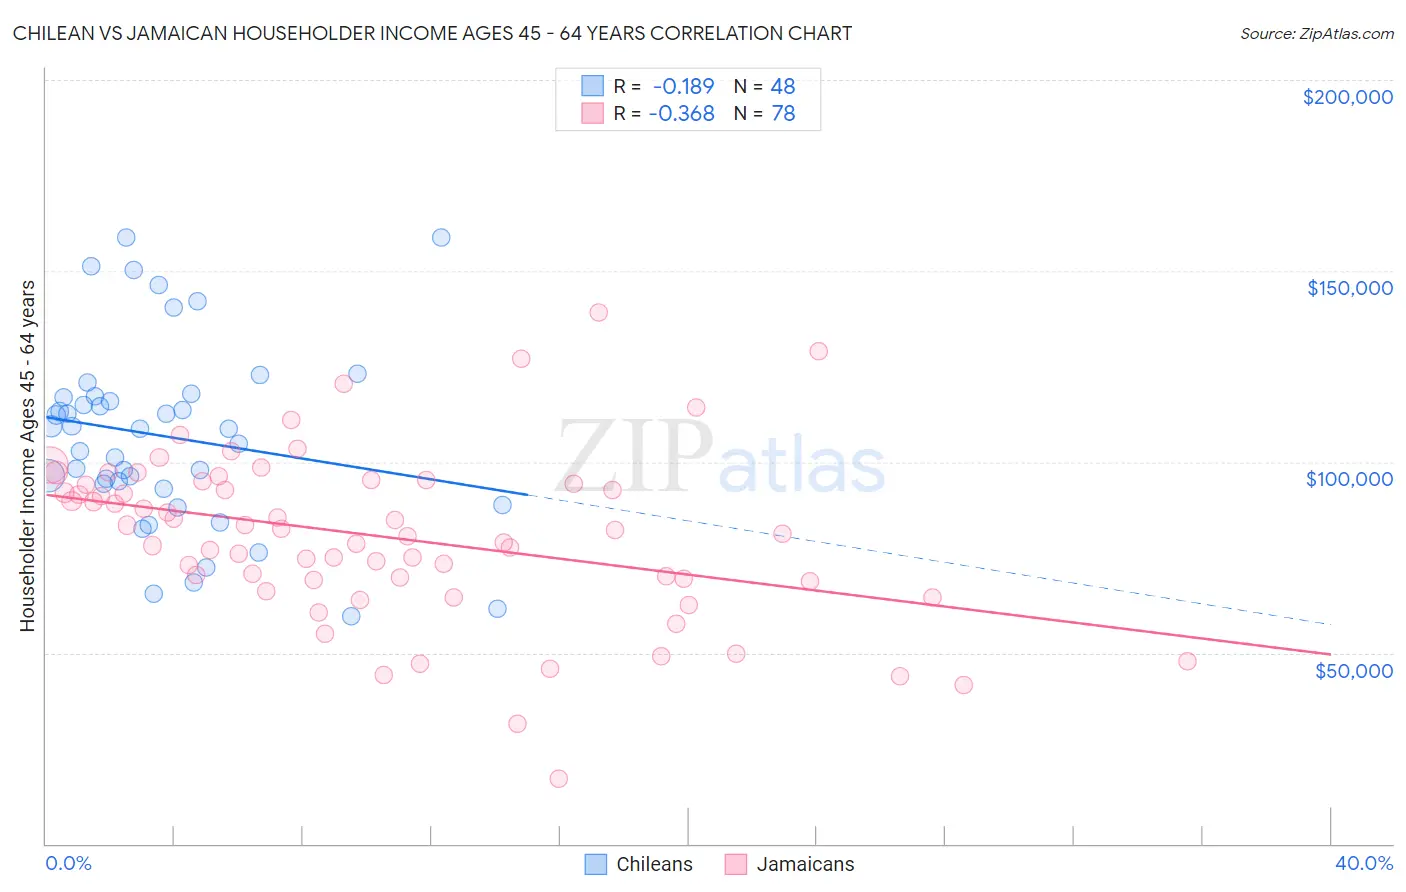 Chilean vs Jamaican Householder Income Ages 45 - 64 years